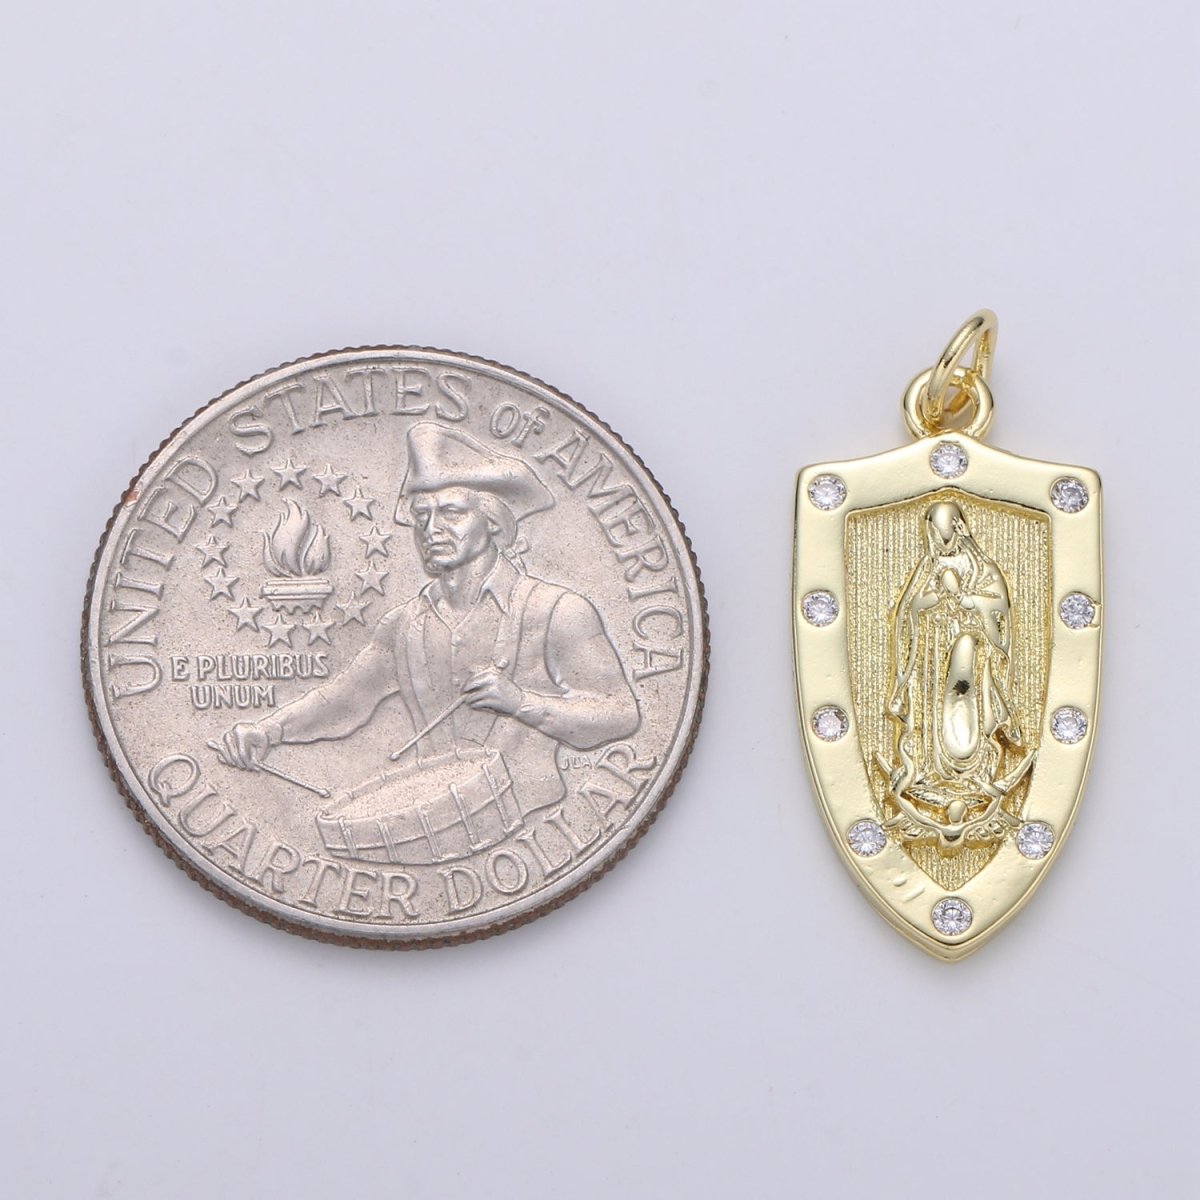 Dainty 14K Gold Filled Virgin Mother Mary Charm Antique Style Vintage lady guadalupe Pendant Gold Shield Medallion Charm Reliigous Jewelry,E-108 - DLUXCA